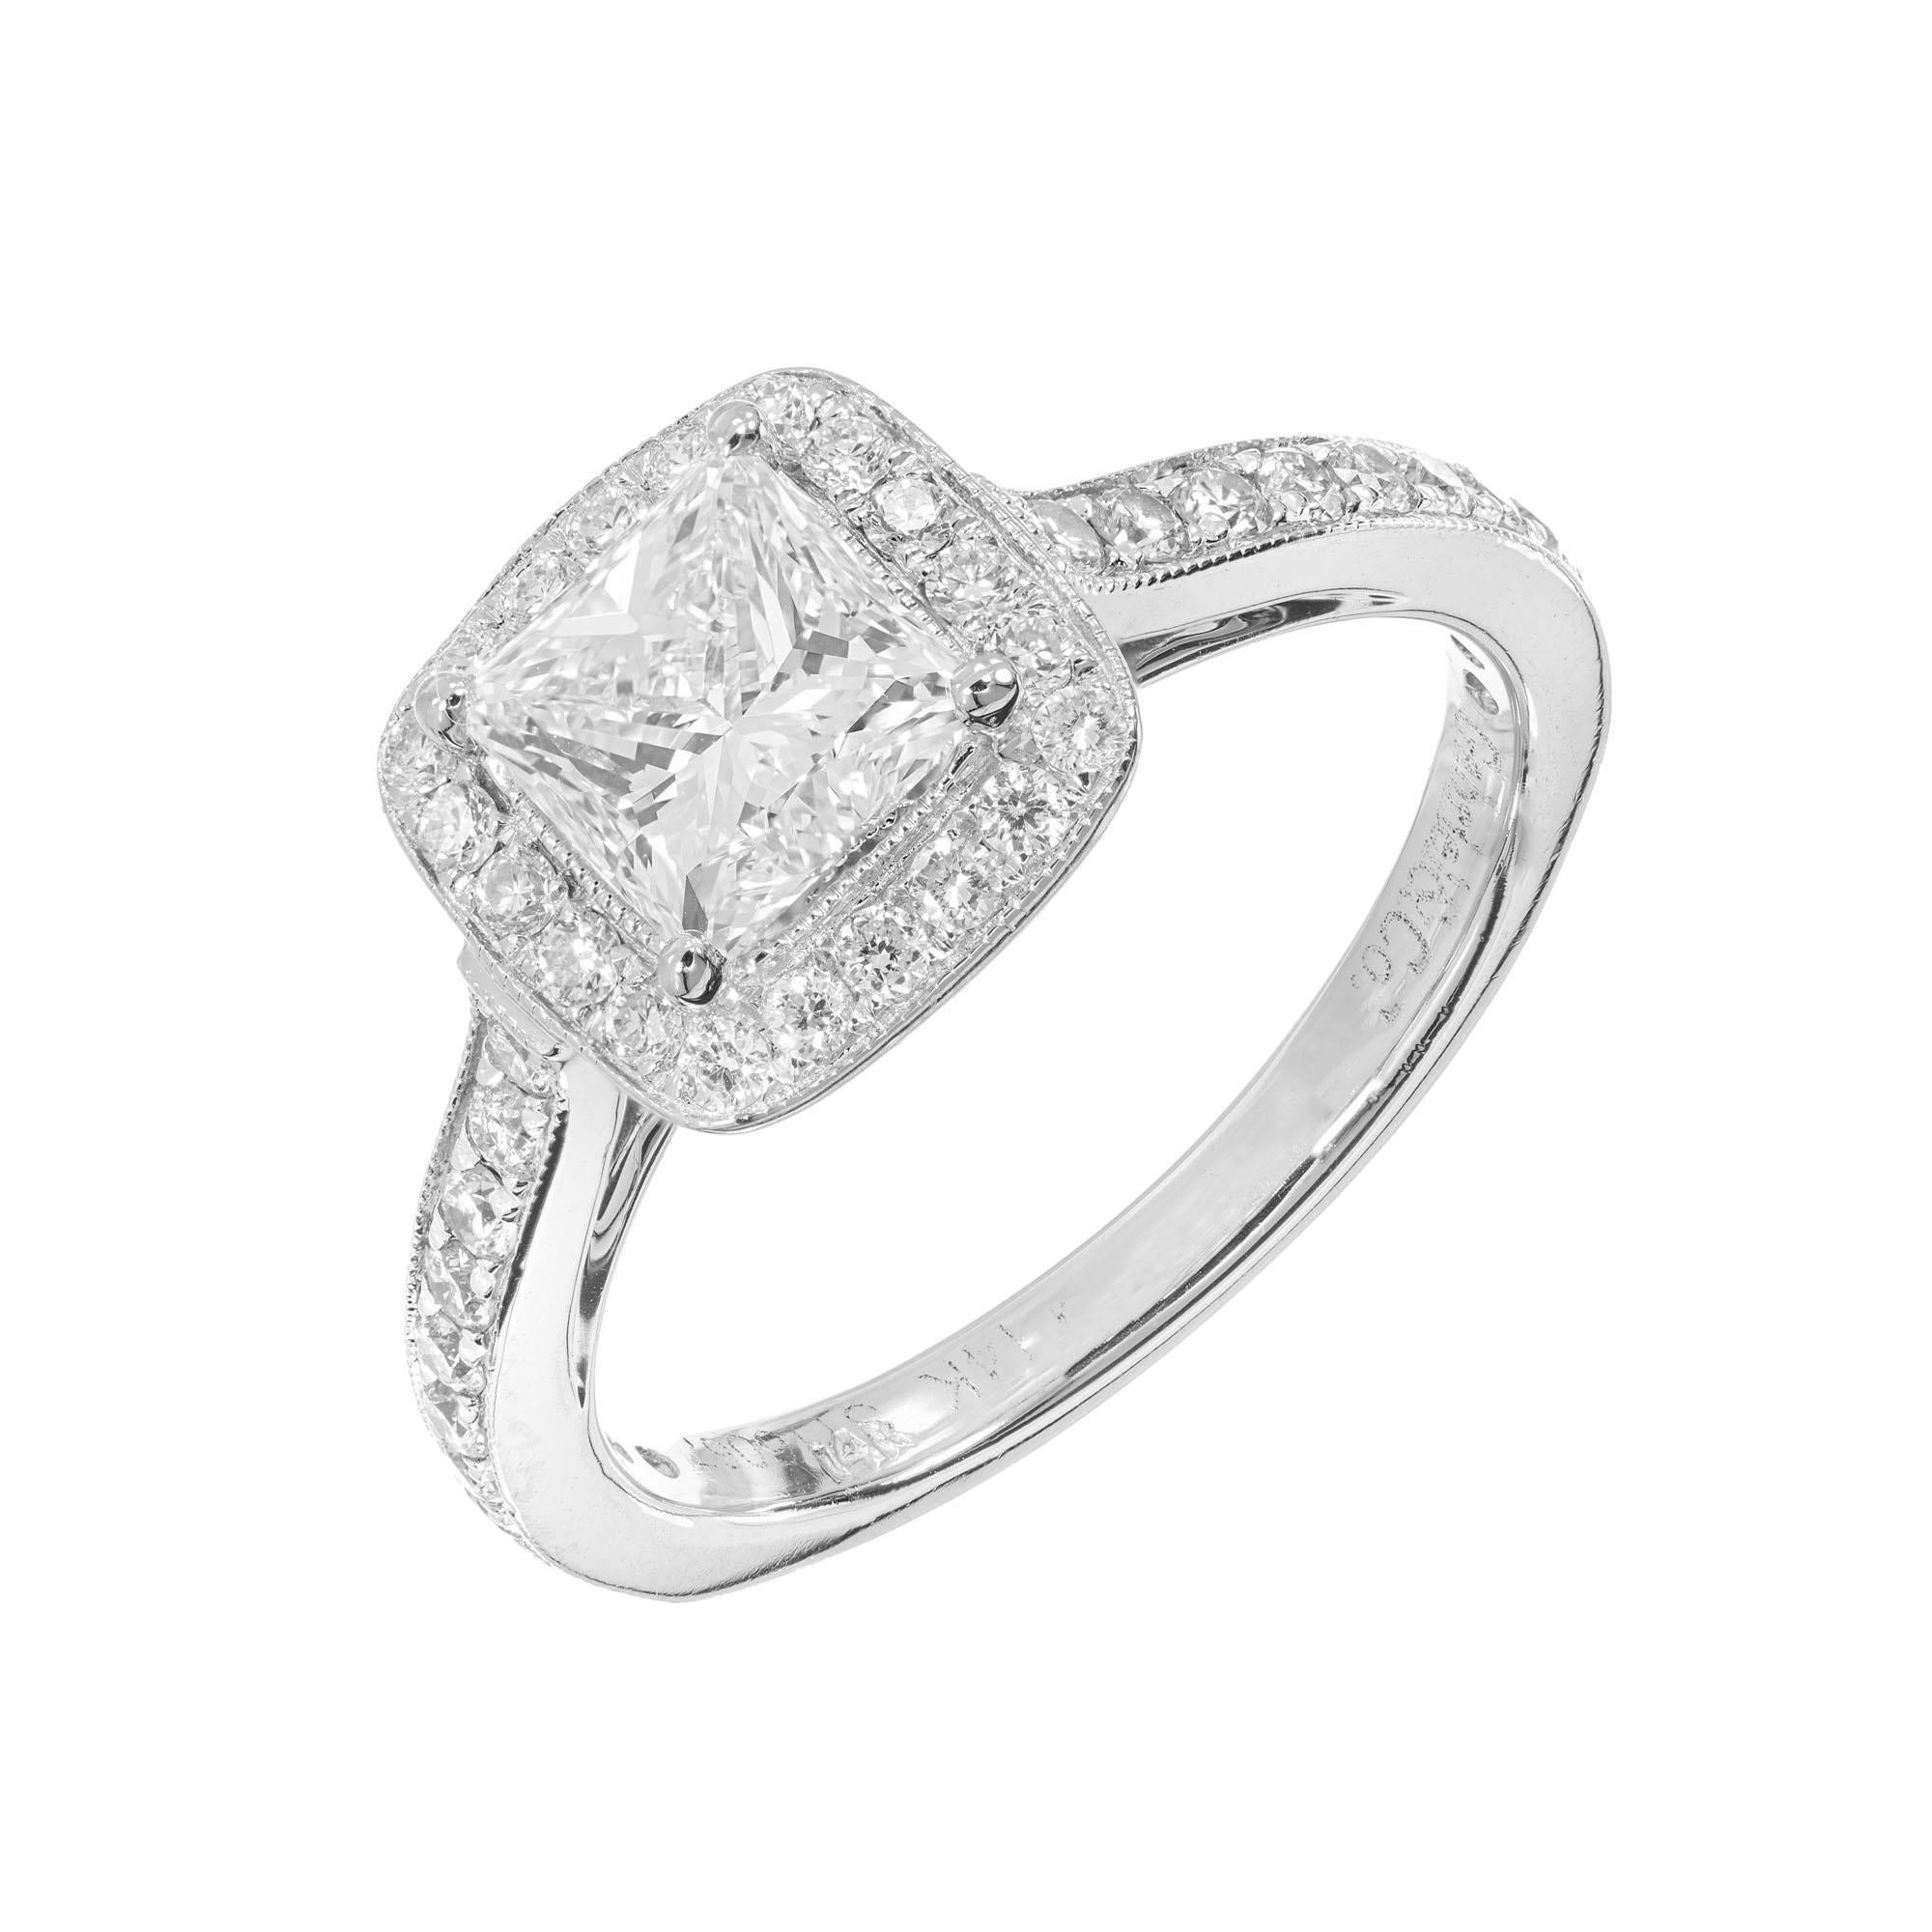 Gabriel style S116067 diamond halo engagement ring. GIA certified princess cut center stone with a halo of round diamonds in a 14k white gold setting with round diamonds along the shank.   

1 Princess cut diamond, approx. total weight 1.00cts, H,